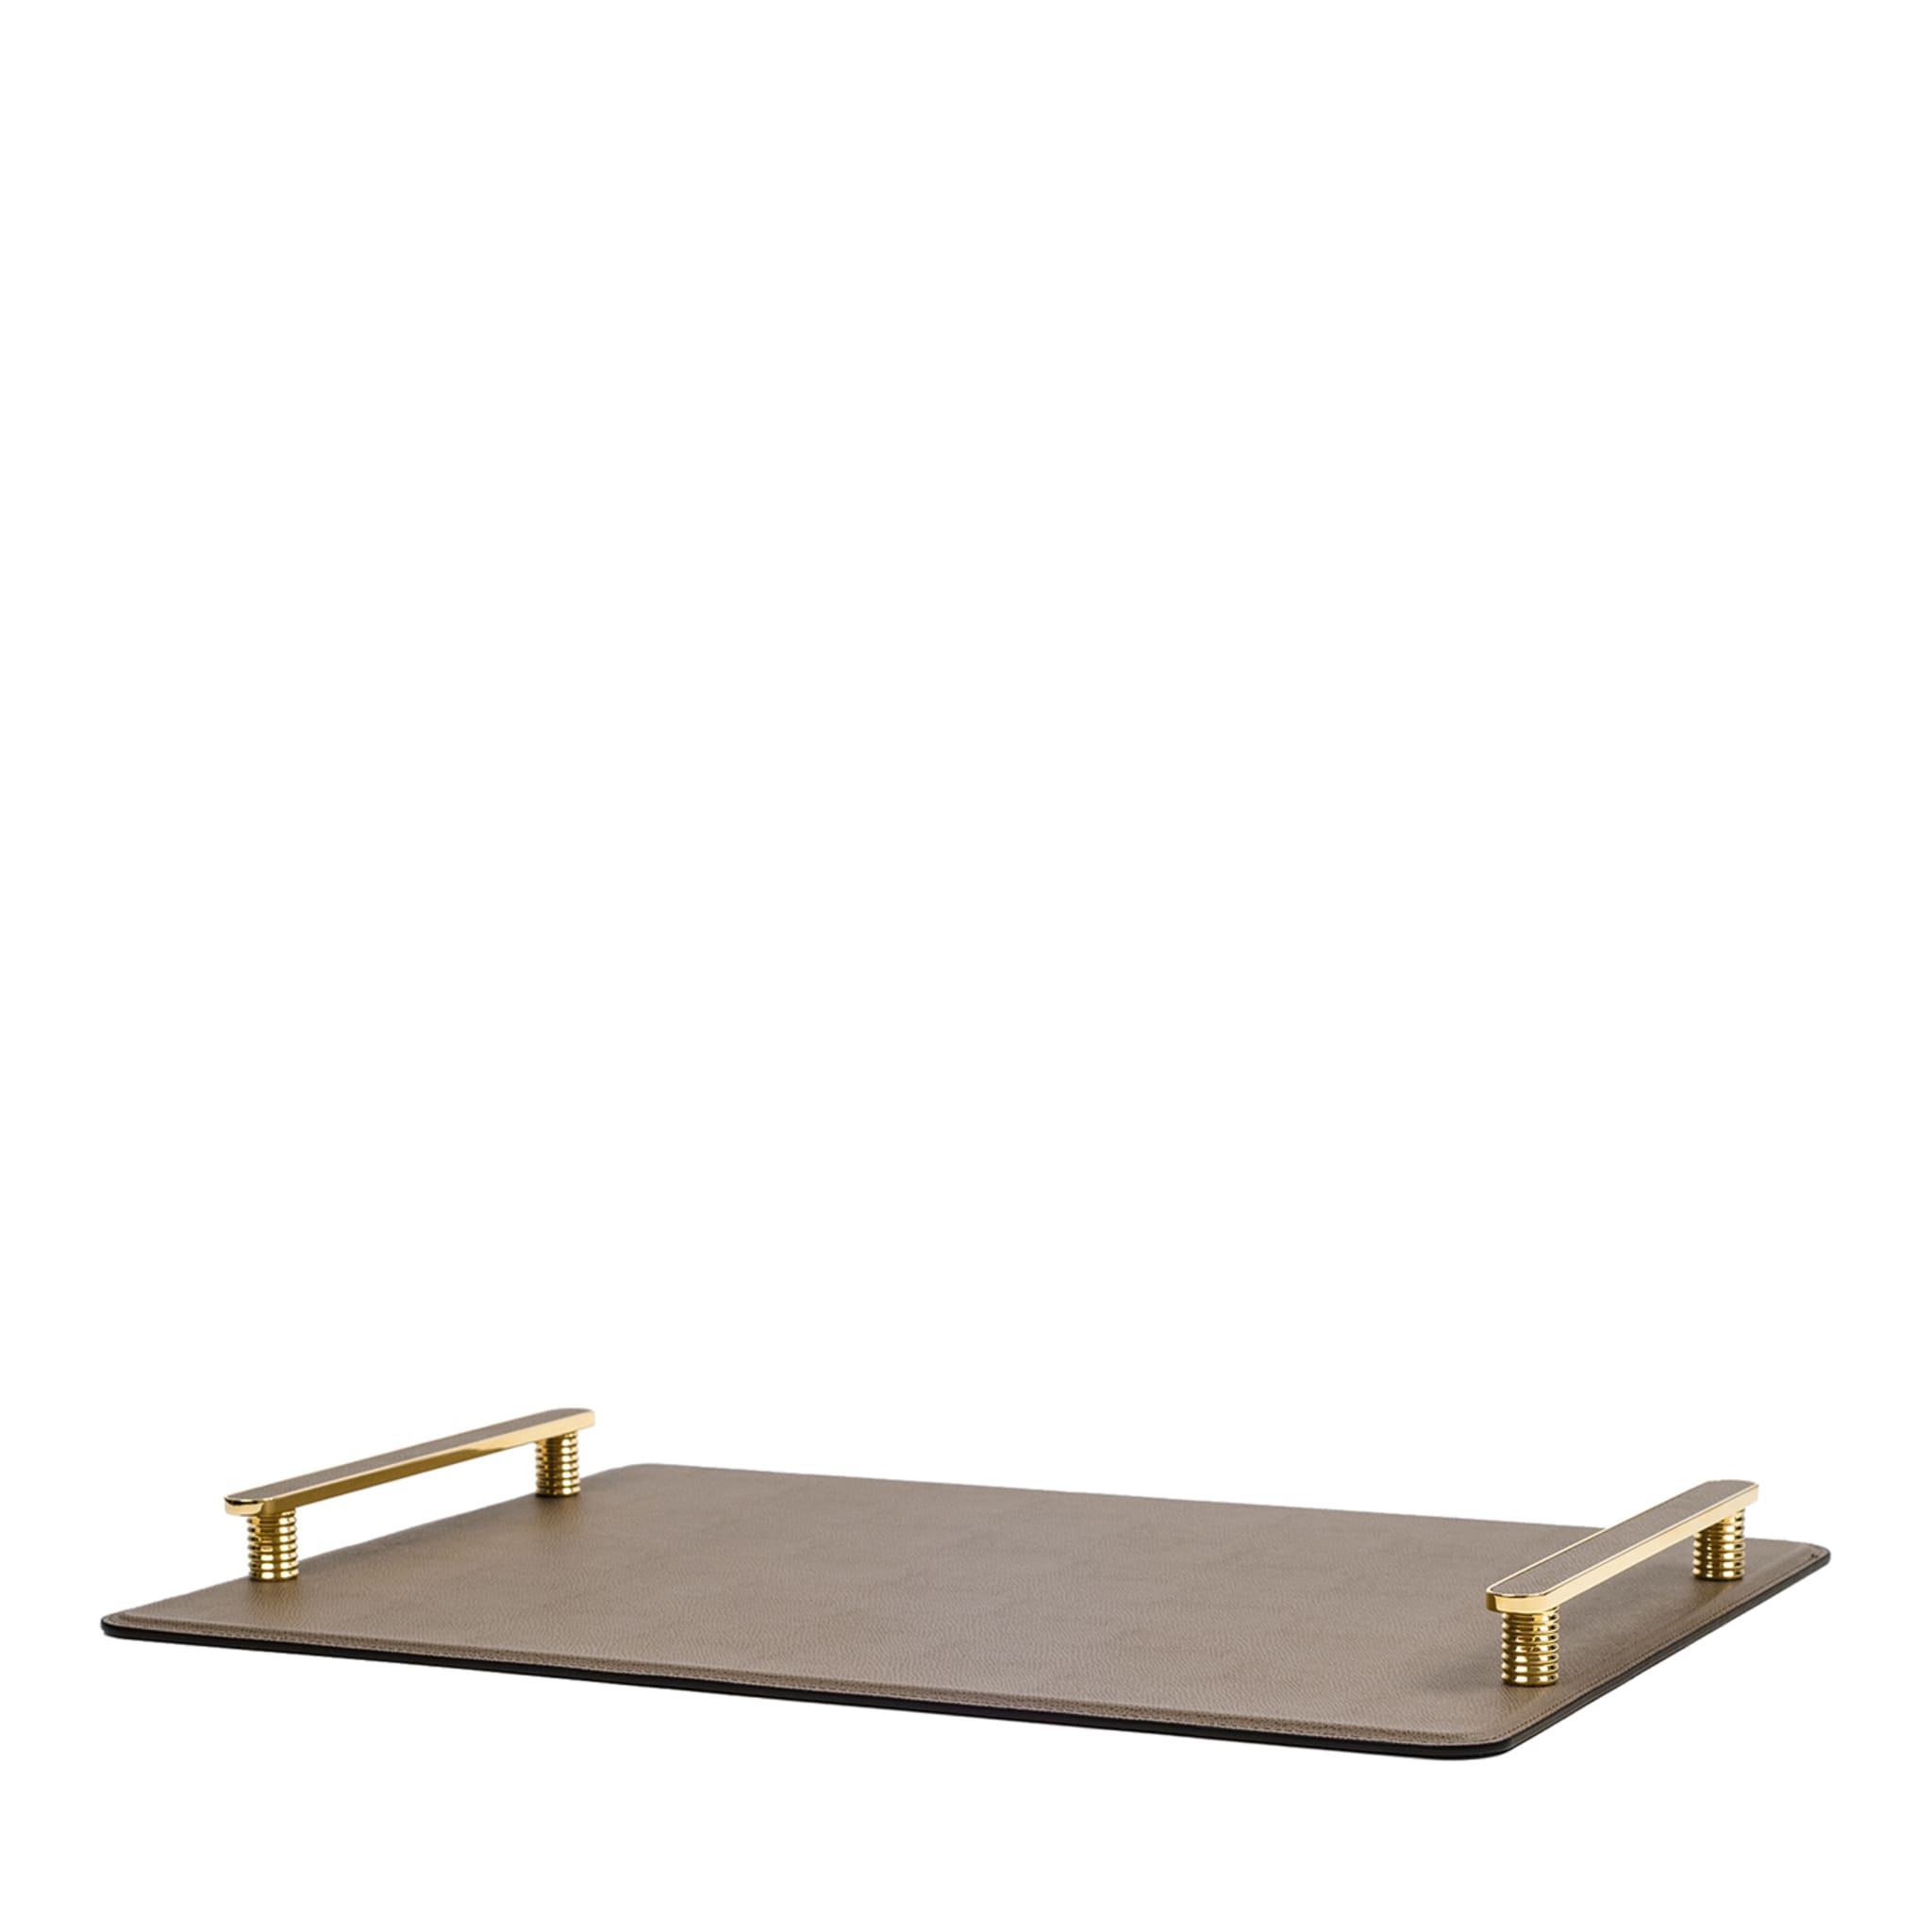 Venaria Large Rectangular Gold/Gray Leather Tray - Main view